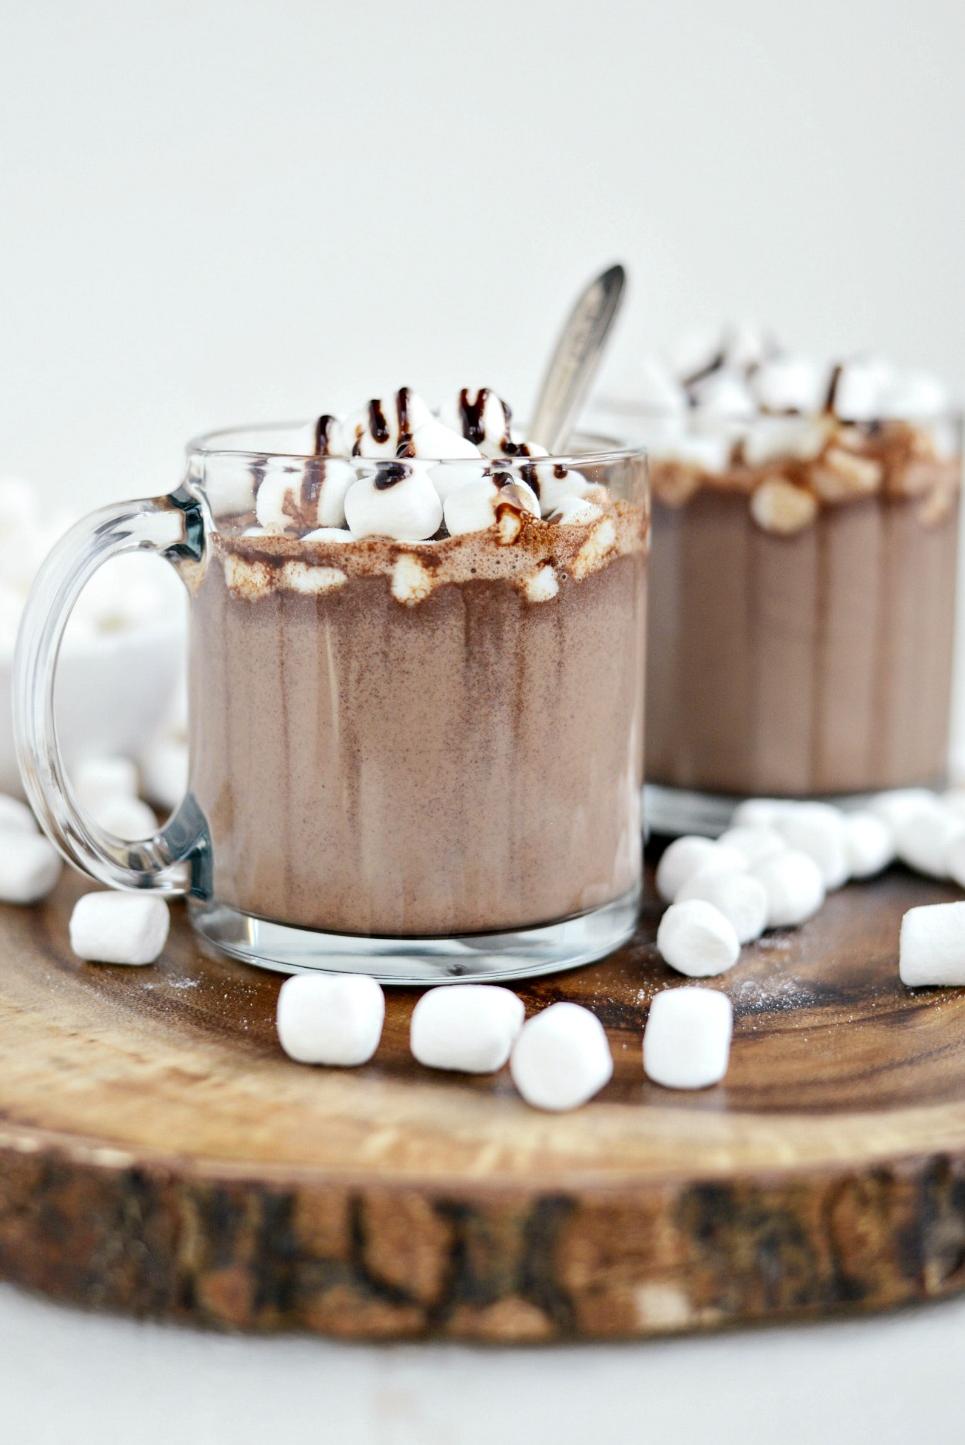  Get ready to indulge in a heavenly cup of hot chocolate like no other.